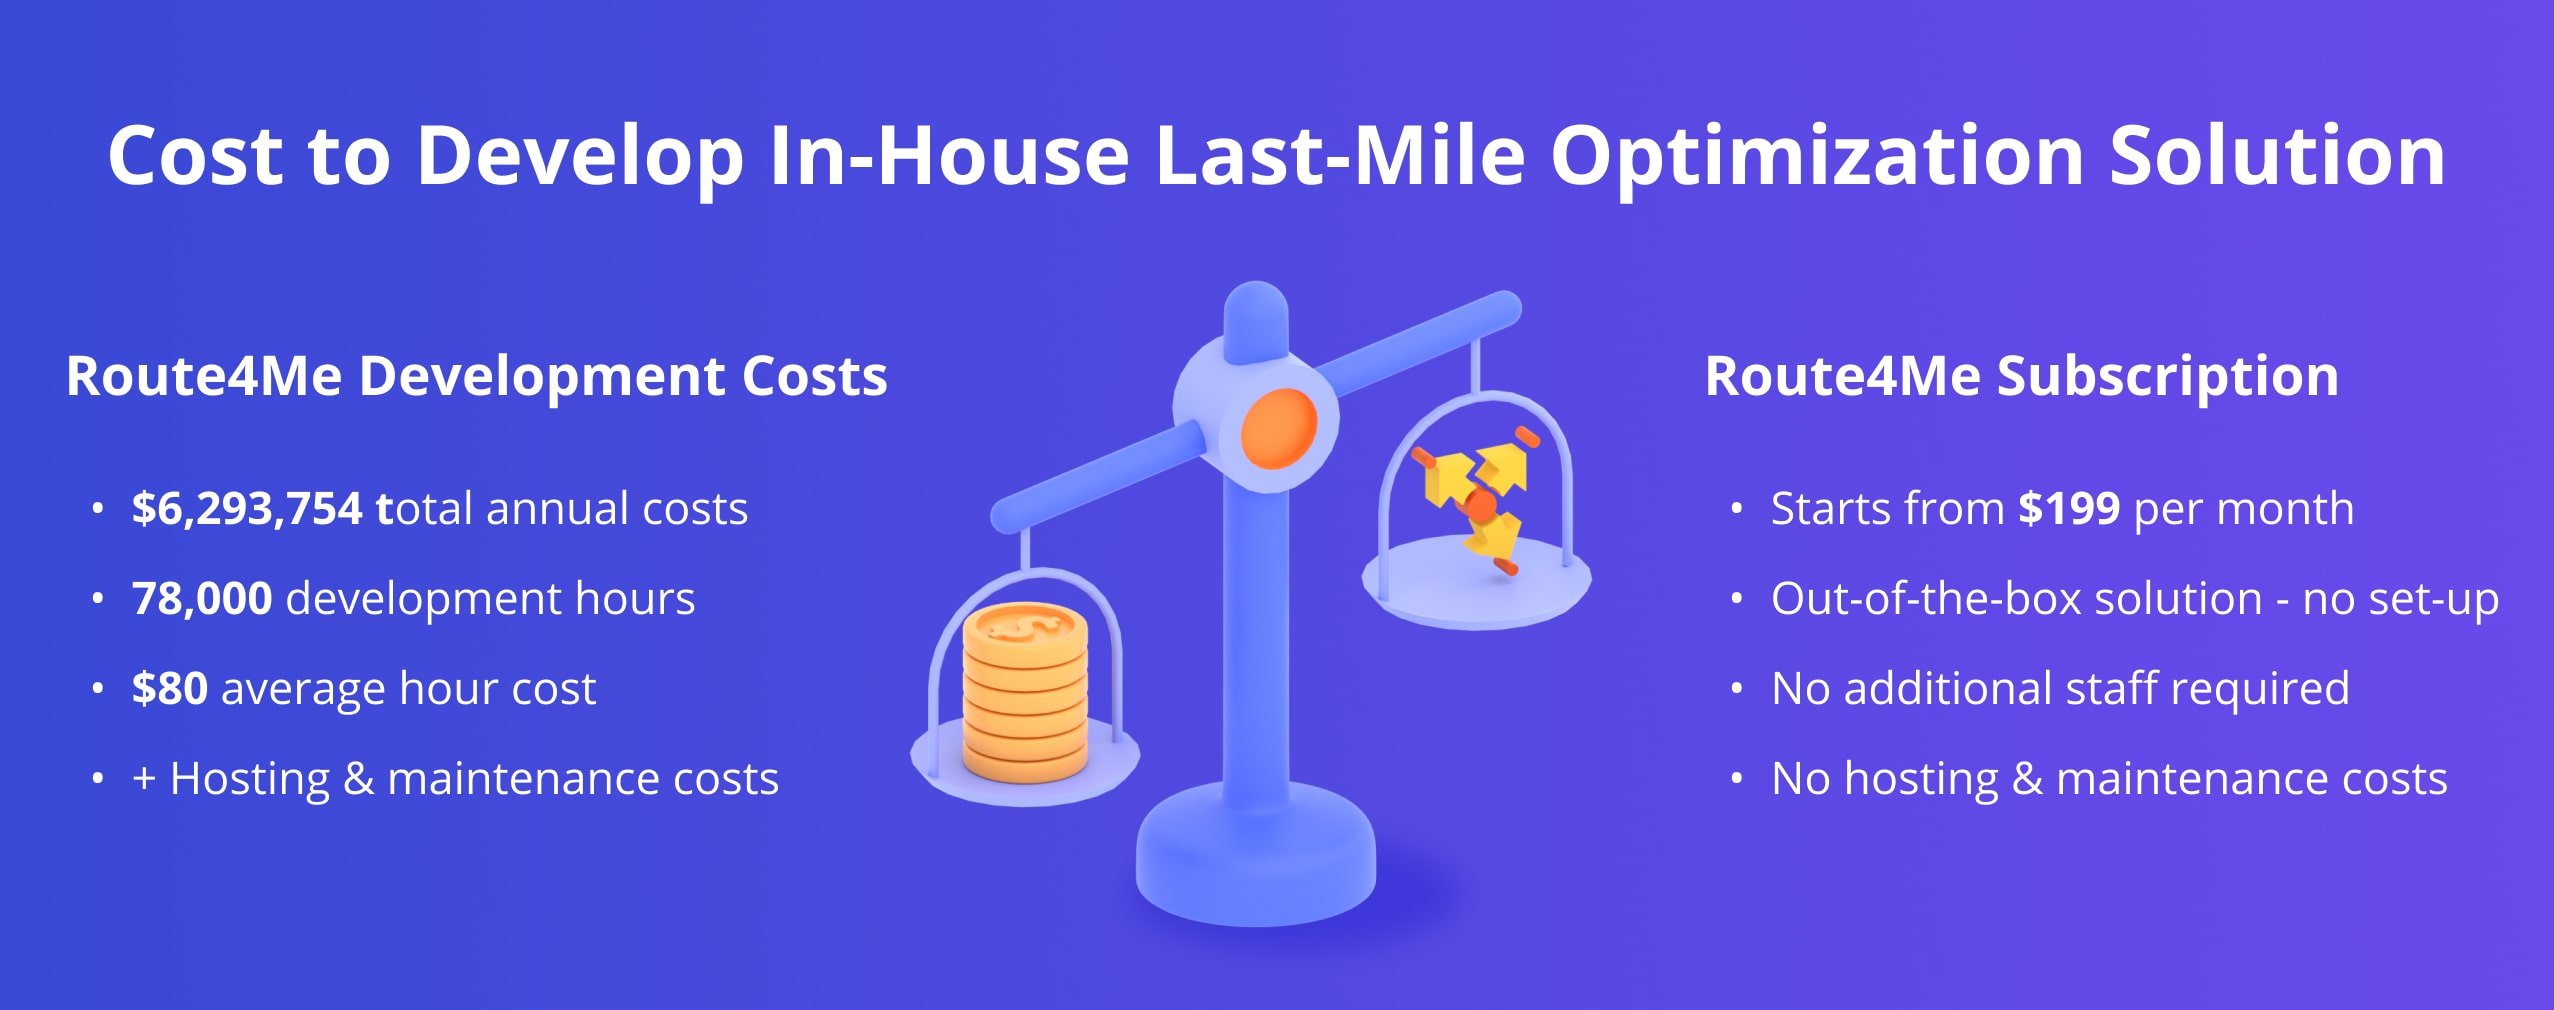 How much it costs to develop an in-house last-mile route optimization software solution like Route4Me.